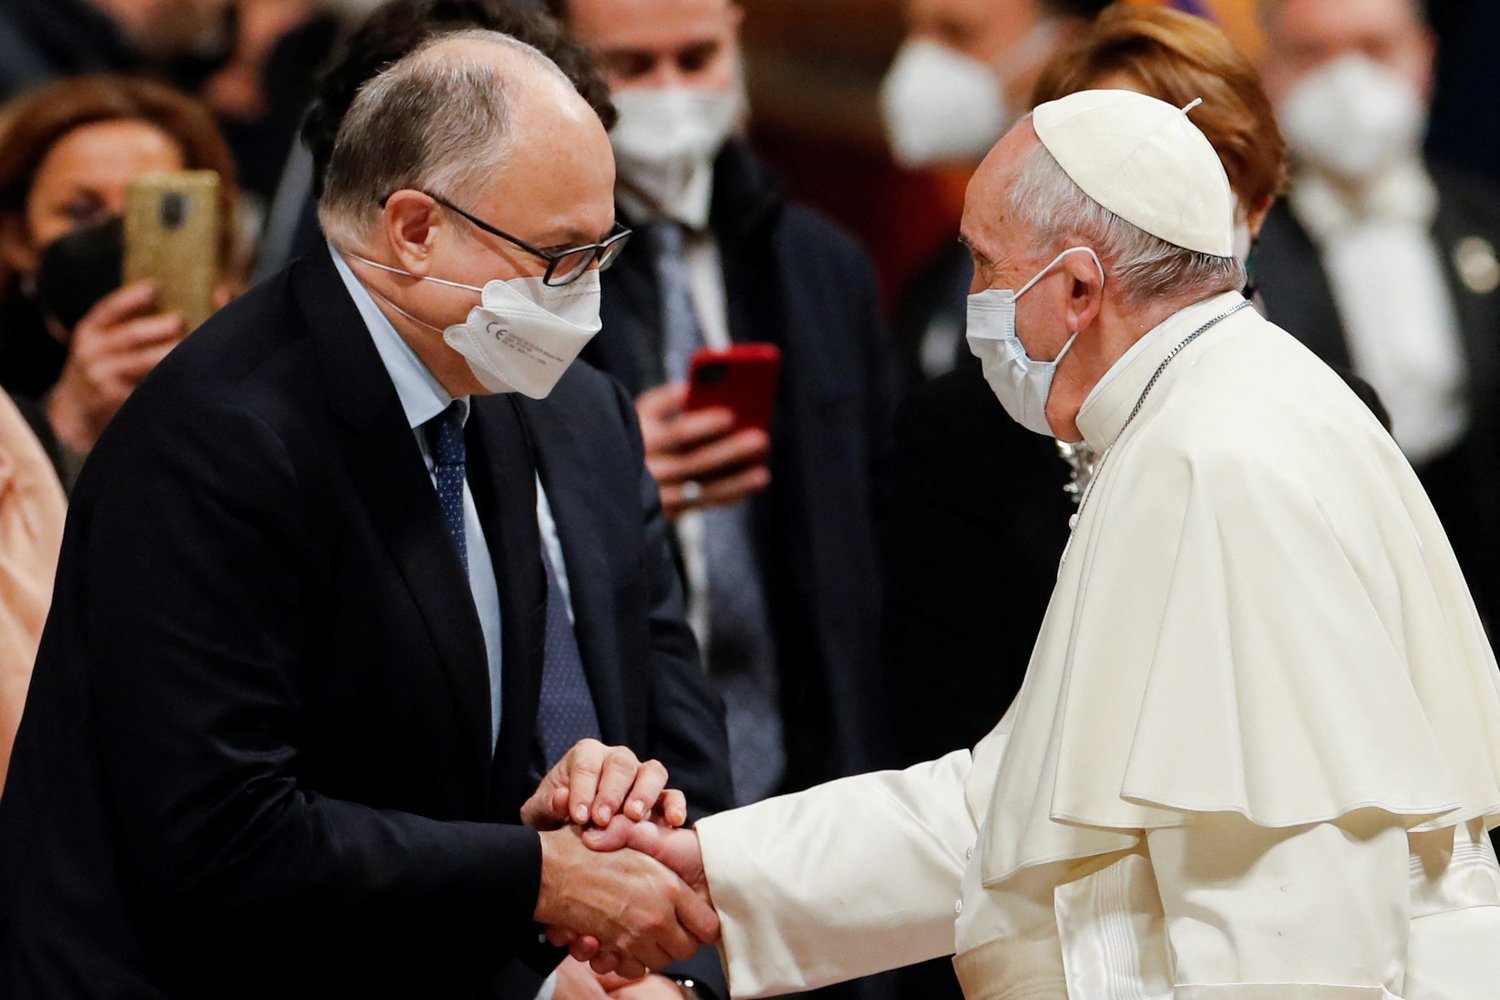 Pope Francis shakes hands with Rome’s new mayor, Roberto Gualtieri, as he arrives for an evening prayer service in St. Peter’s Basilica at the Vatican Dec. 31.